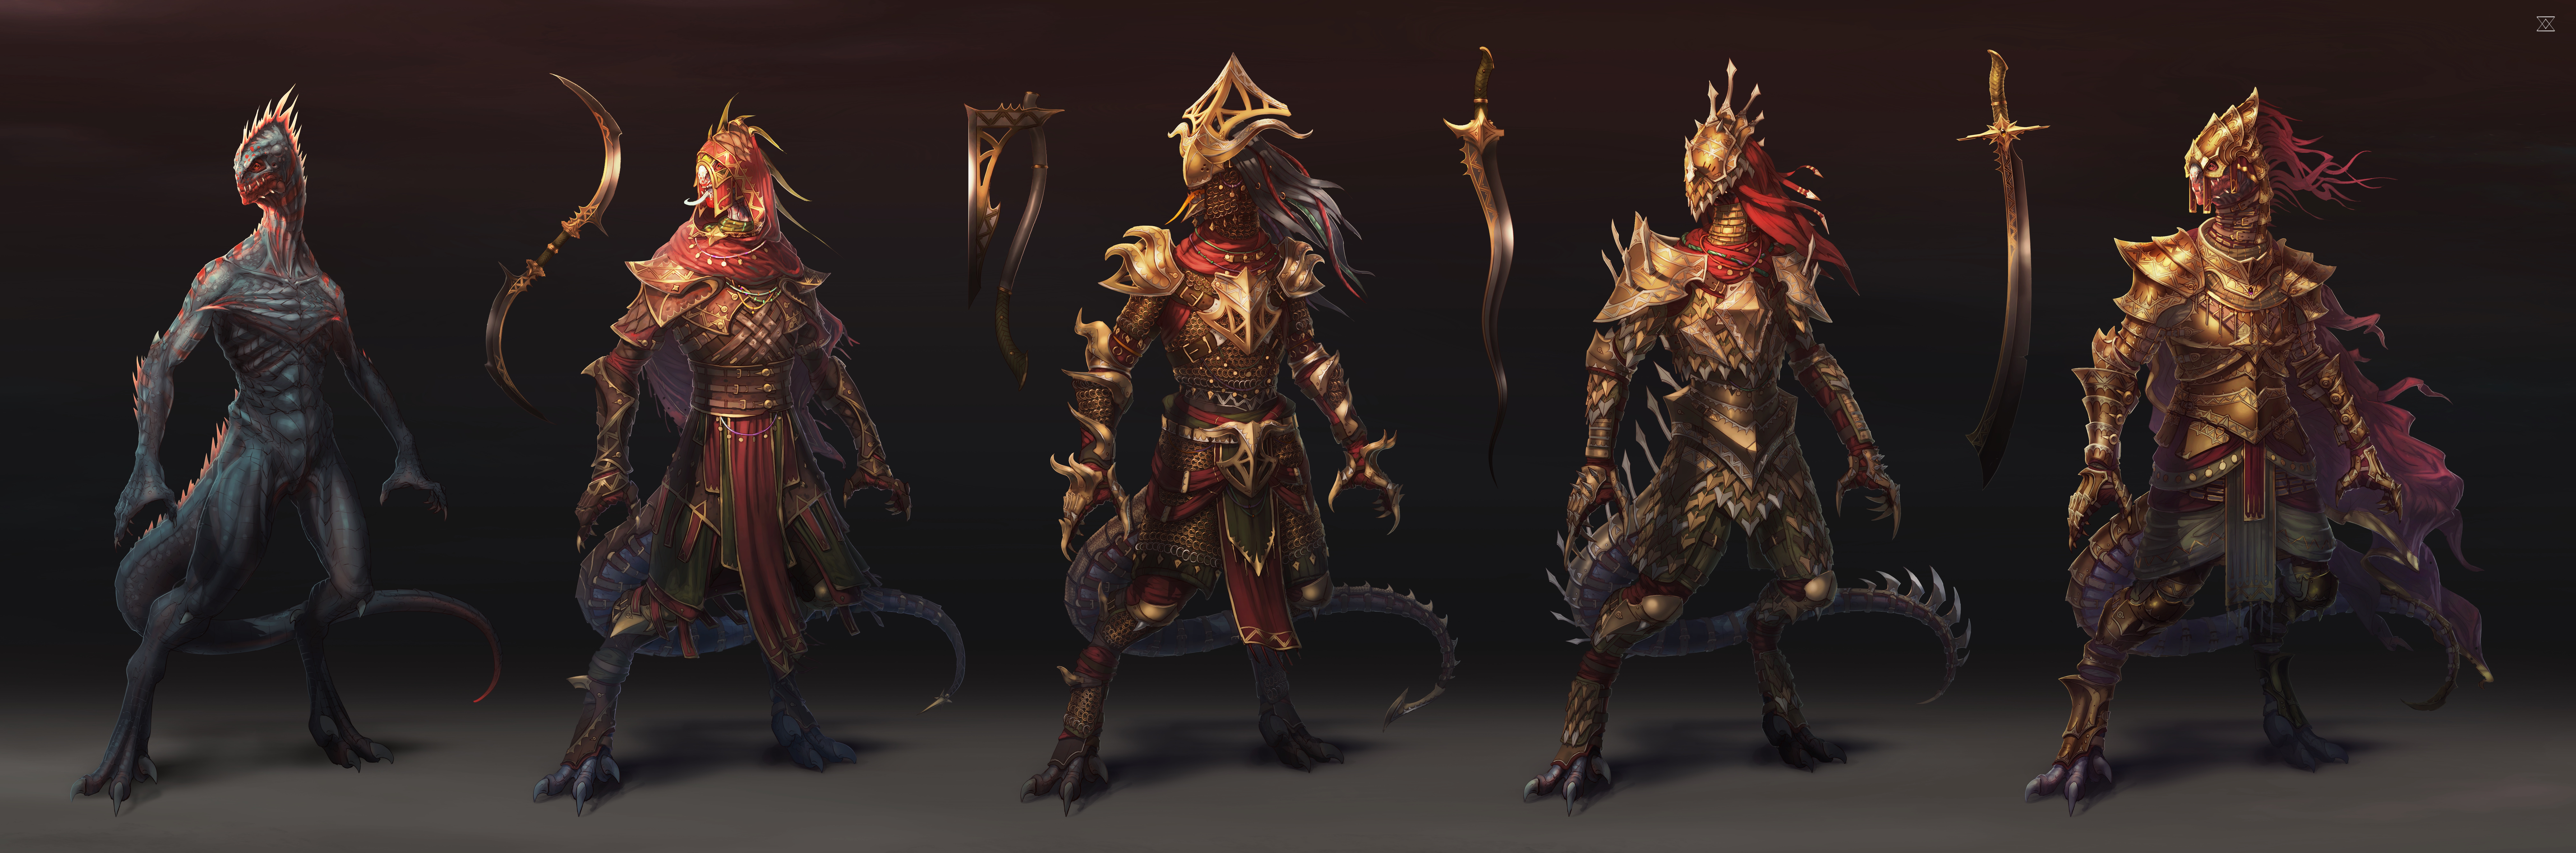 Divinity: Original Sin II Pics, Video Game Collection